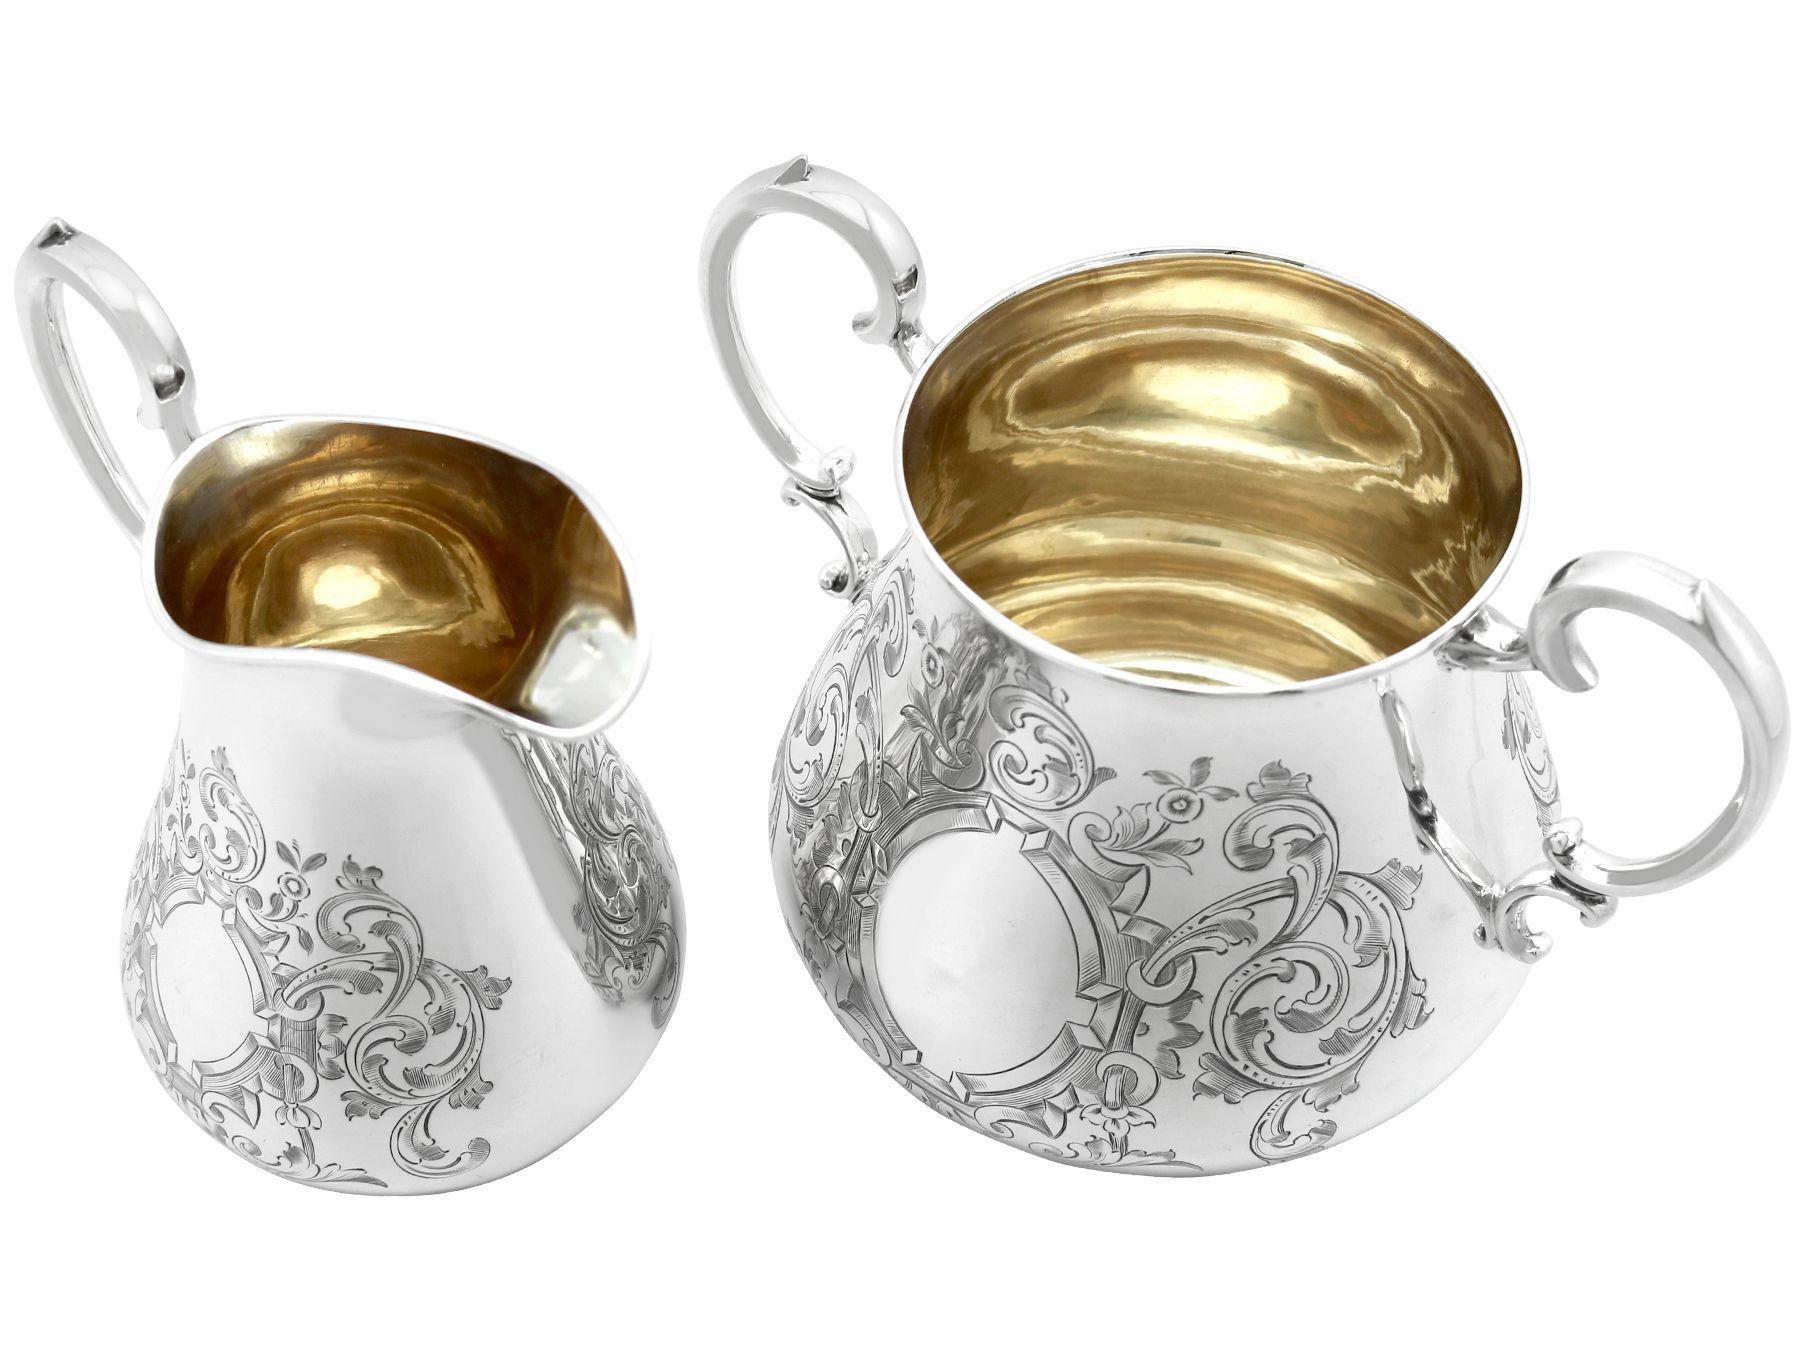 An exceptional, fine and impressive antique Victorian English sterling silver cream jug and sugar bowl; an addition to our silver teaware collection

This exceptional pair consists of an antique Victorian English sterling silver cream jug and sugar